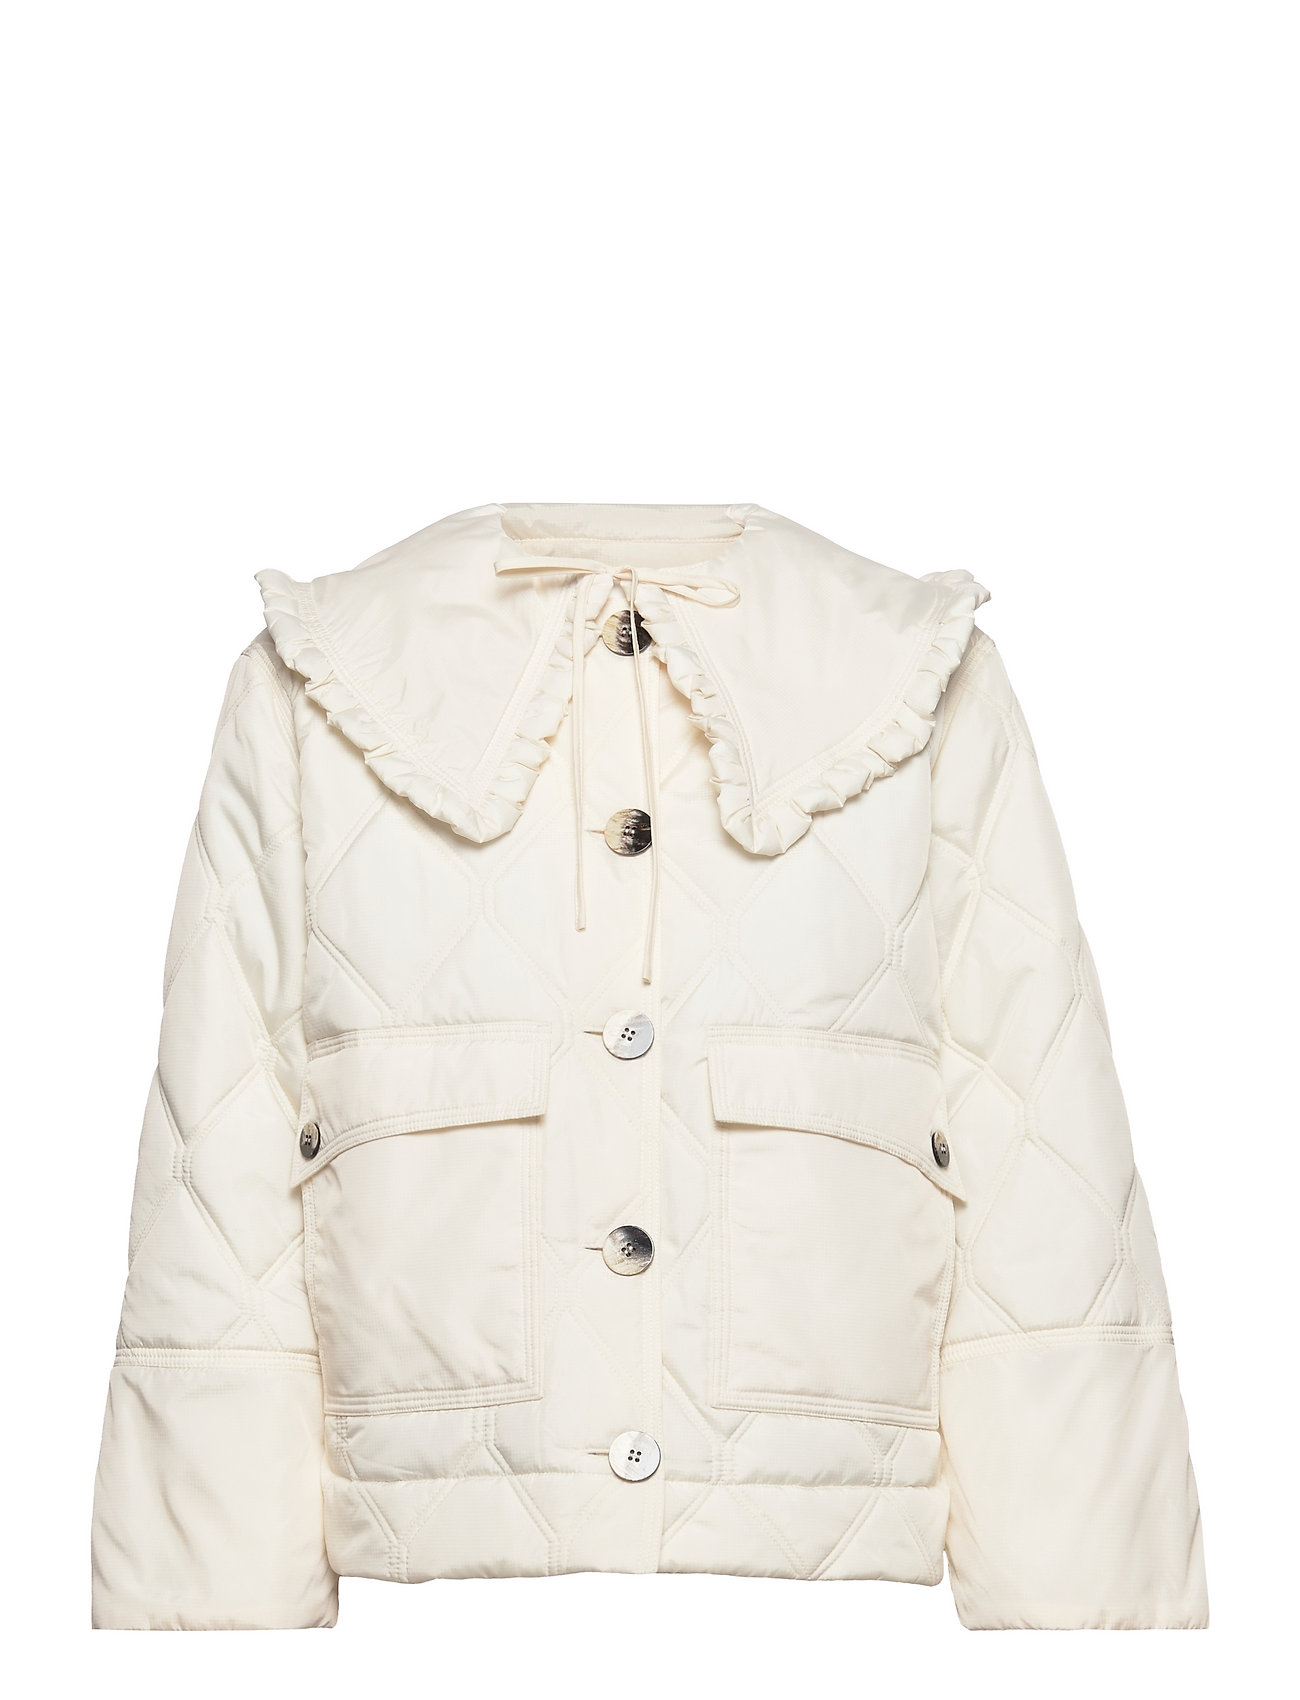 Jane Austen Manifold obligatorisk Ganni Ripstop Quilt Frill Collar Jacket - 325 €. Buy Quilted jackets from  Ganni online at Boozt.com. Fast delivery and easy returns